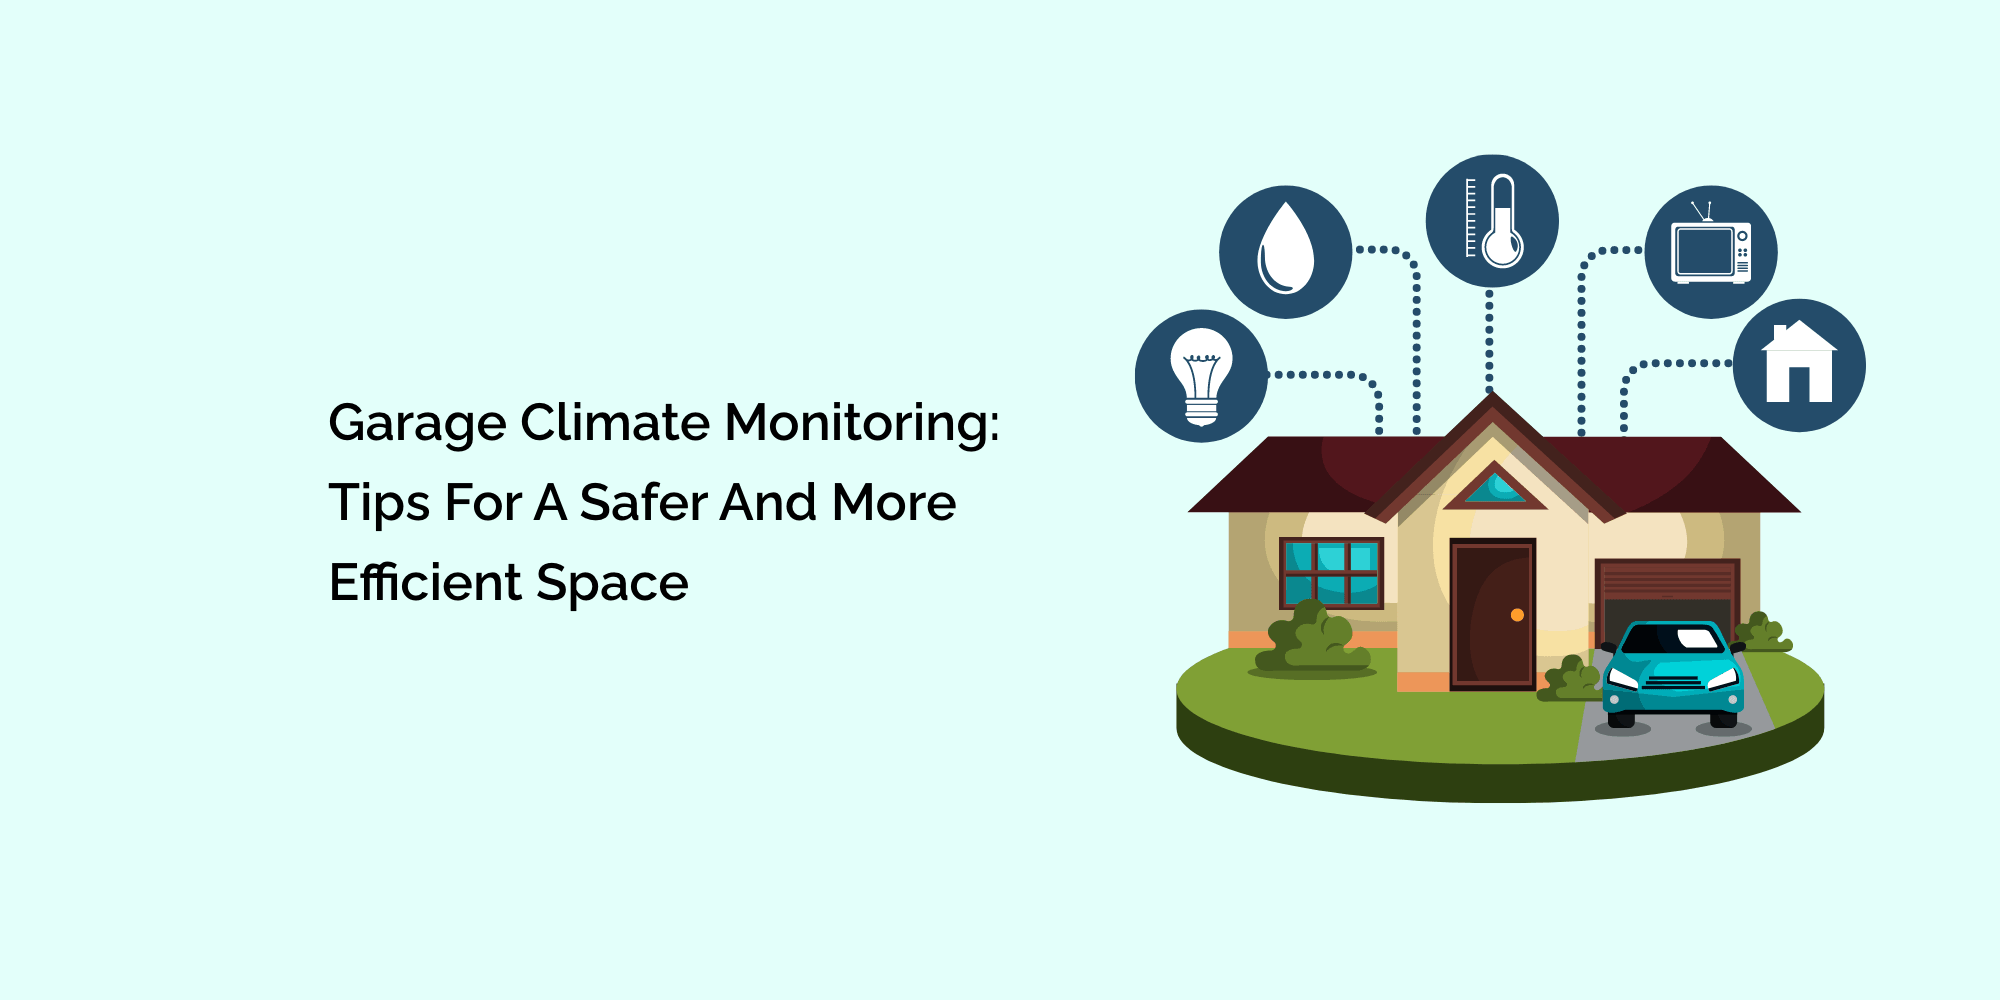 Garage Climate Monitoring: Tips for a Safer and More Efficient Space